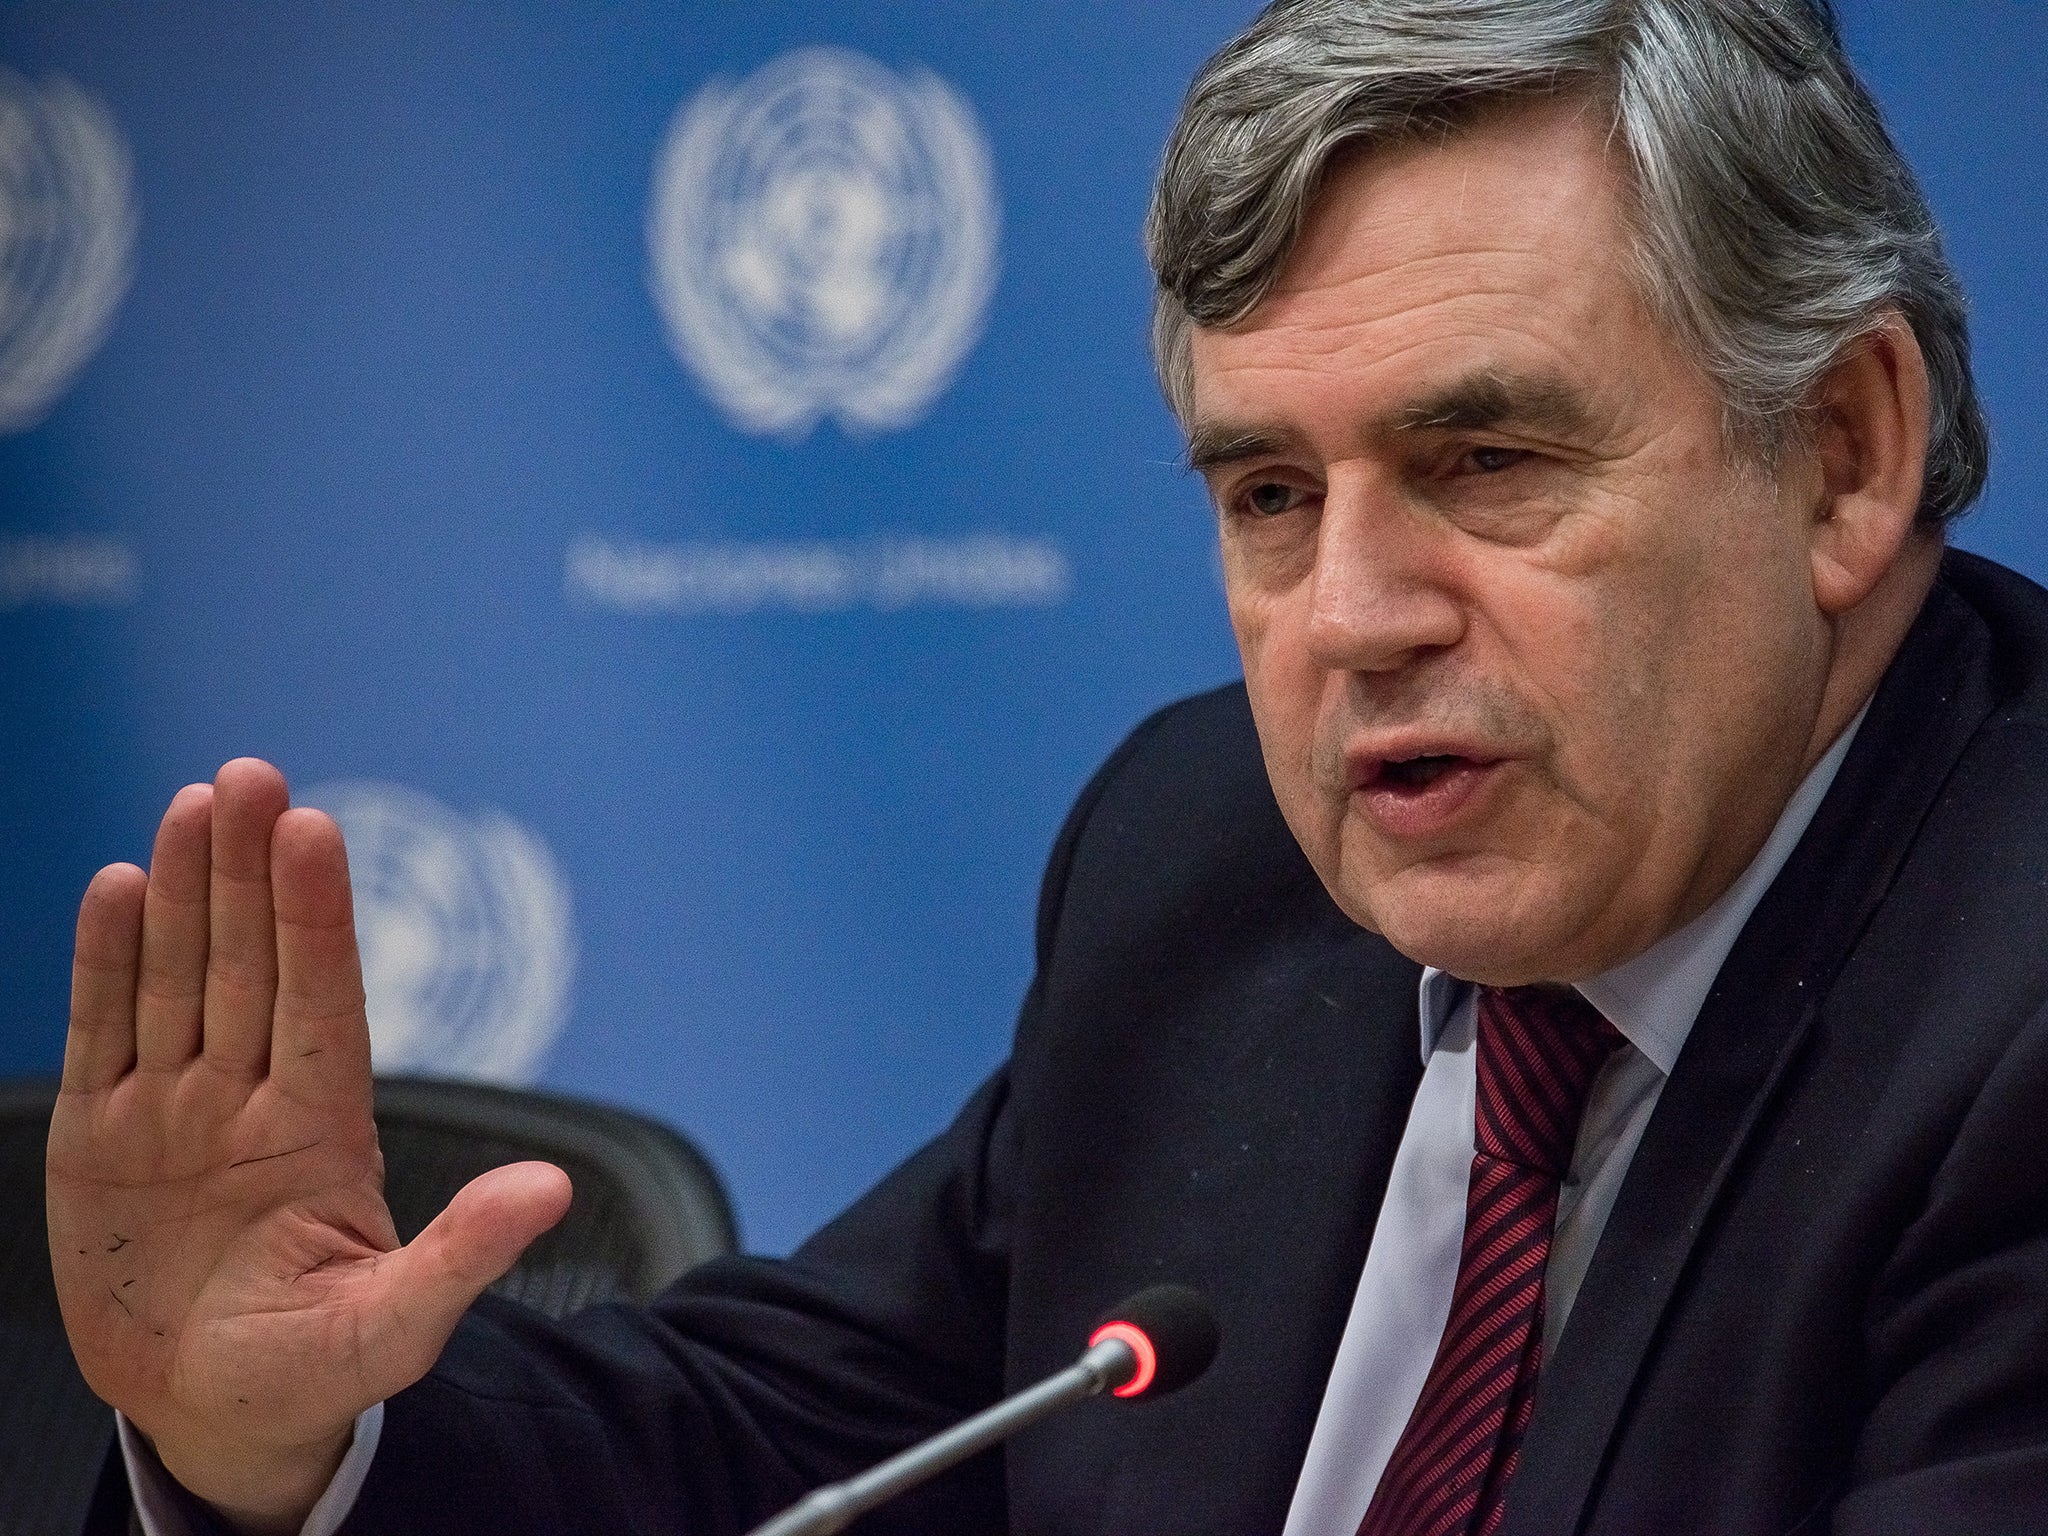 Gordon Brown, in his capacity as Special Envoy for Global Education, addressing a press conference at the UN headquarters last week